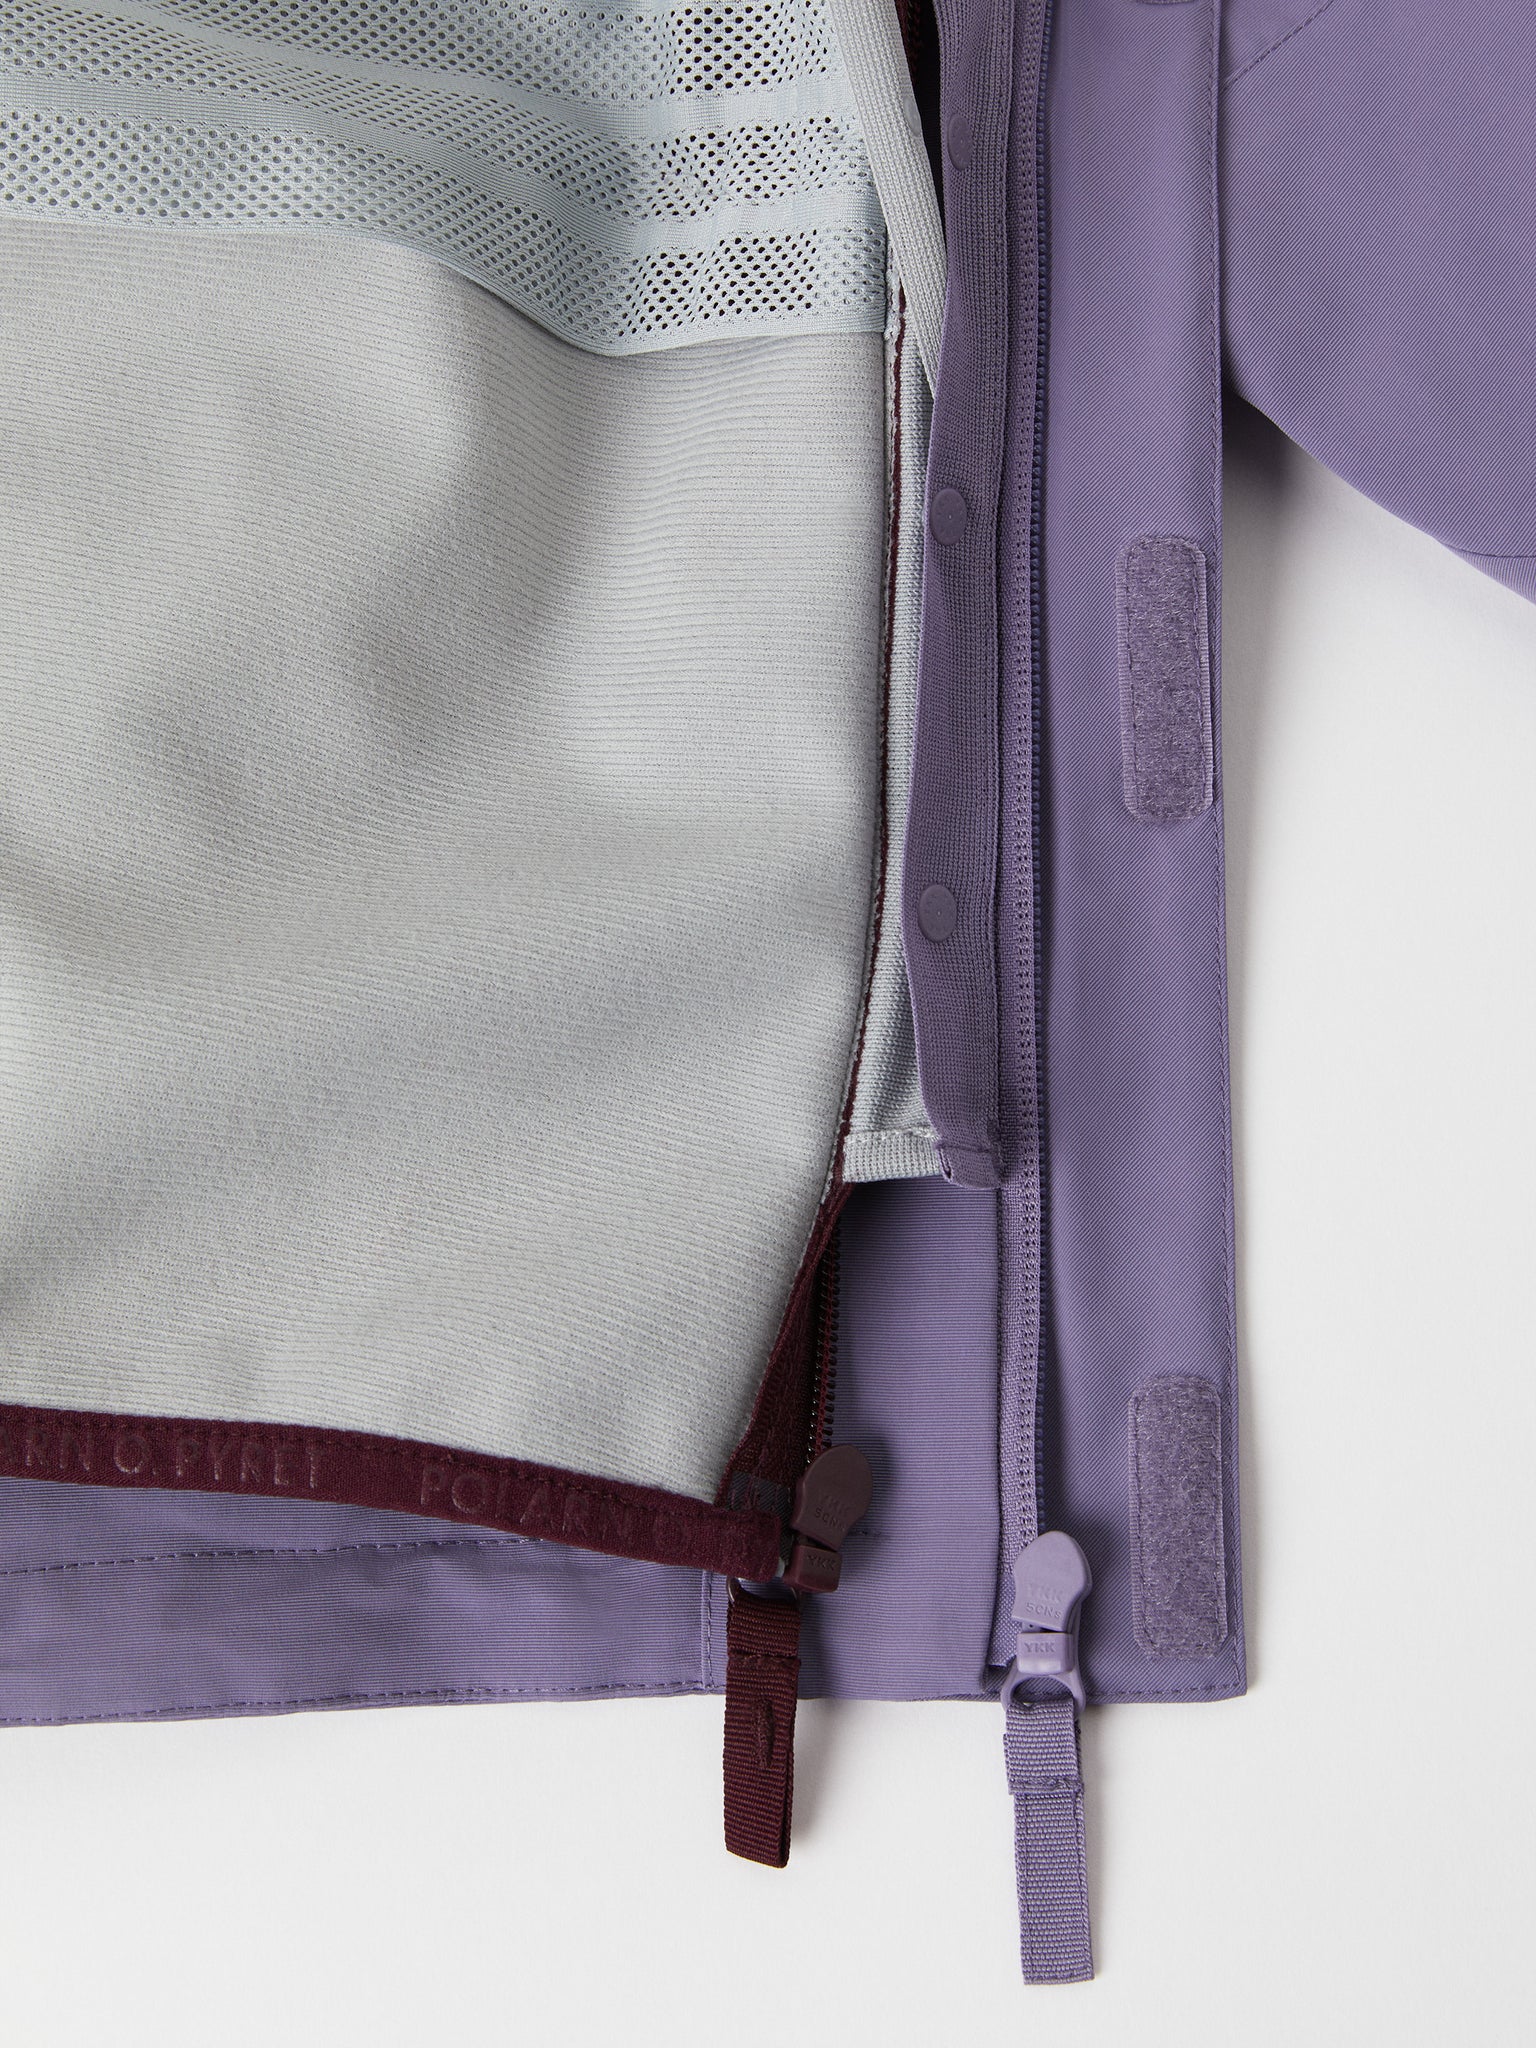 Kids Purple Waterproof Shell Jacket from the Polarn O. Pyret outerwear collection. Kids outerwear made from sustainably source materials